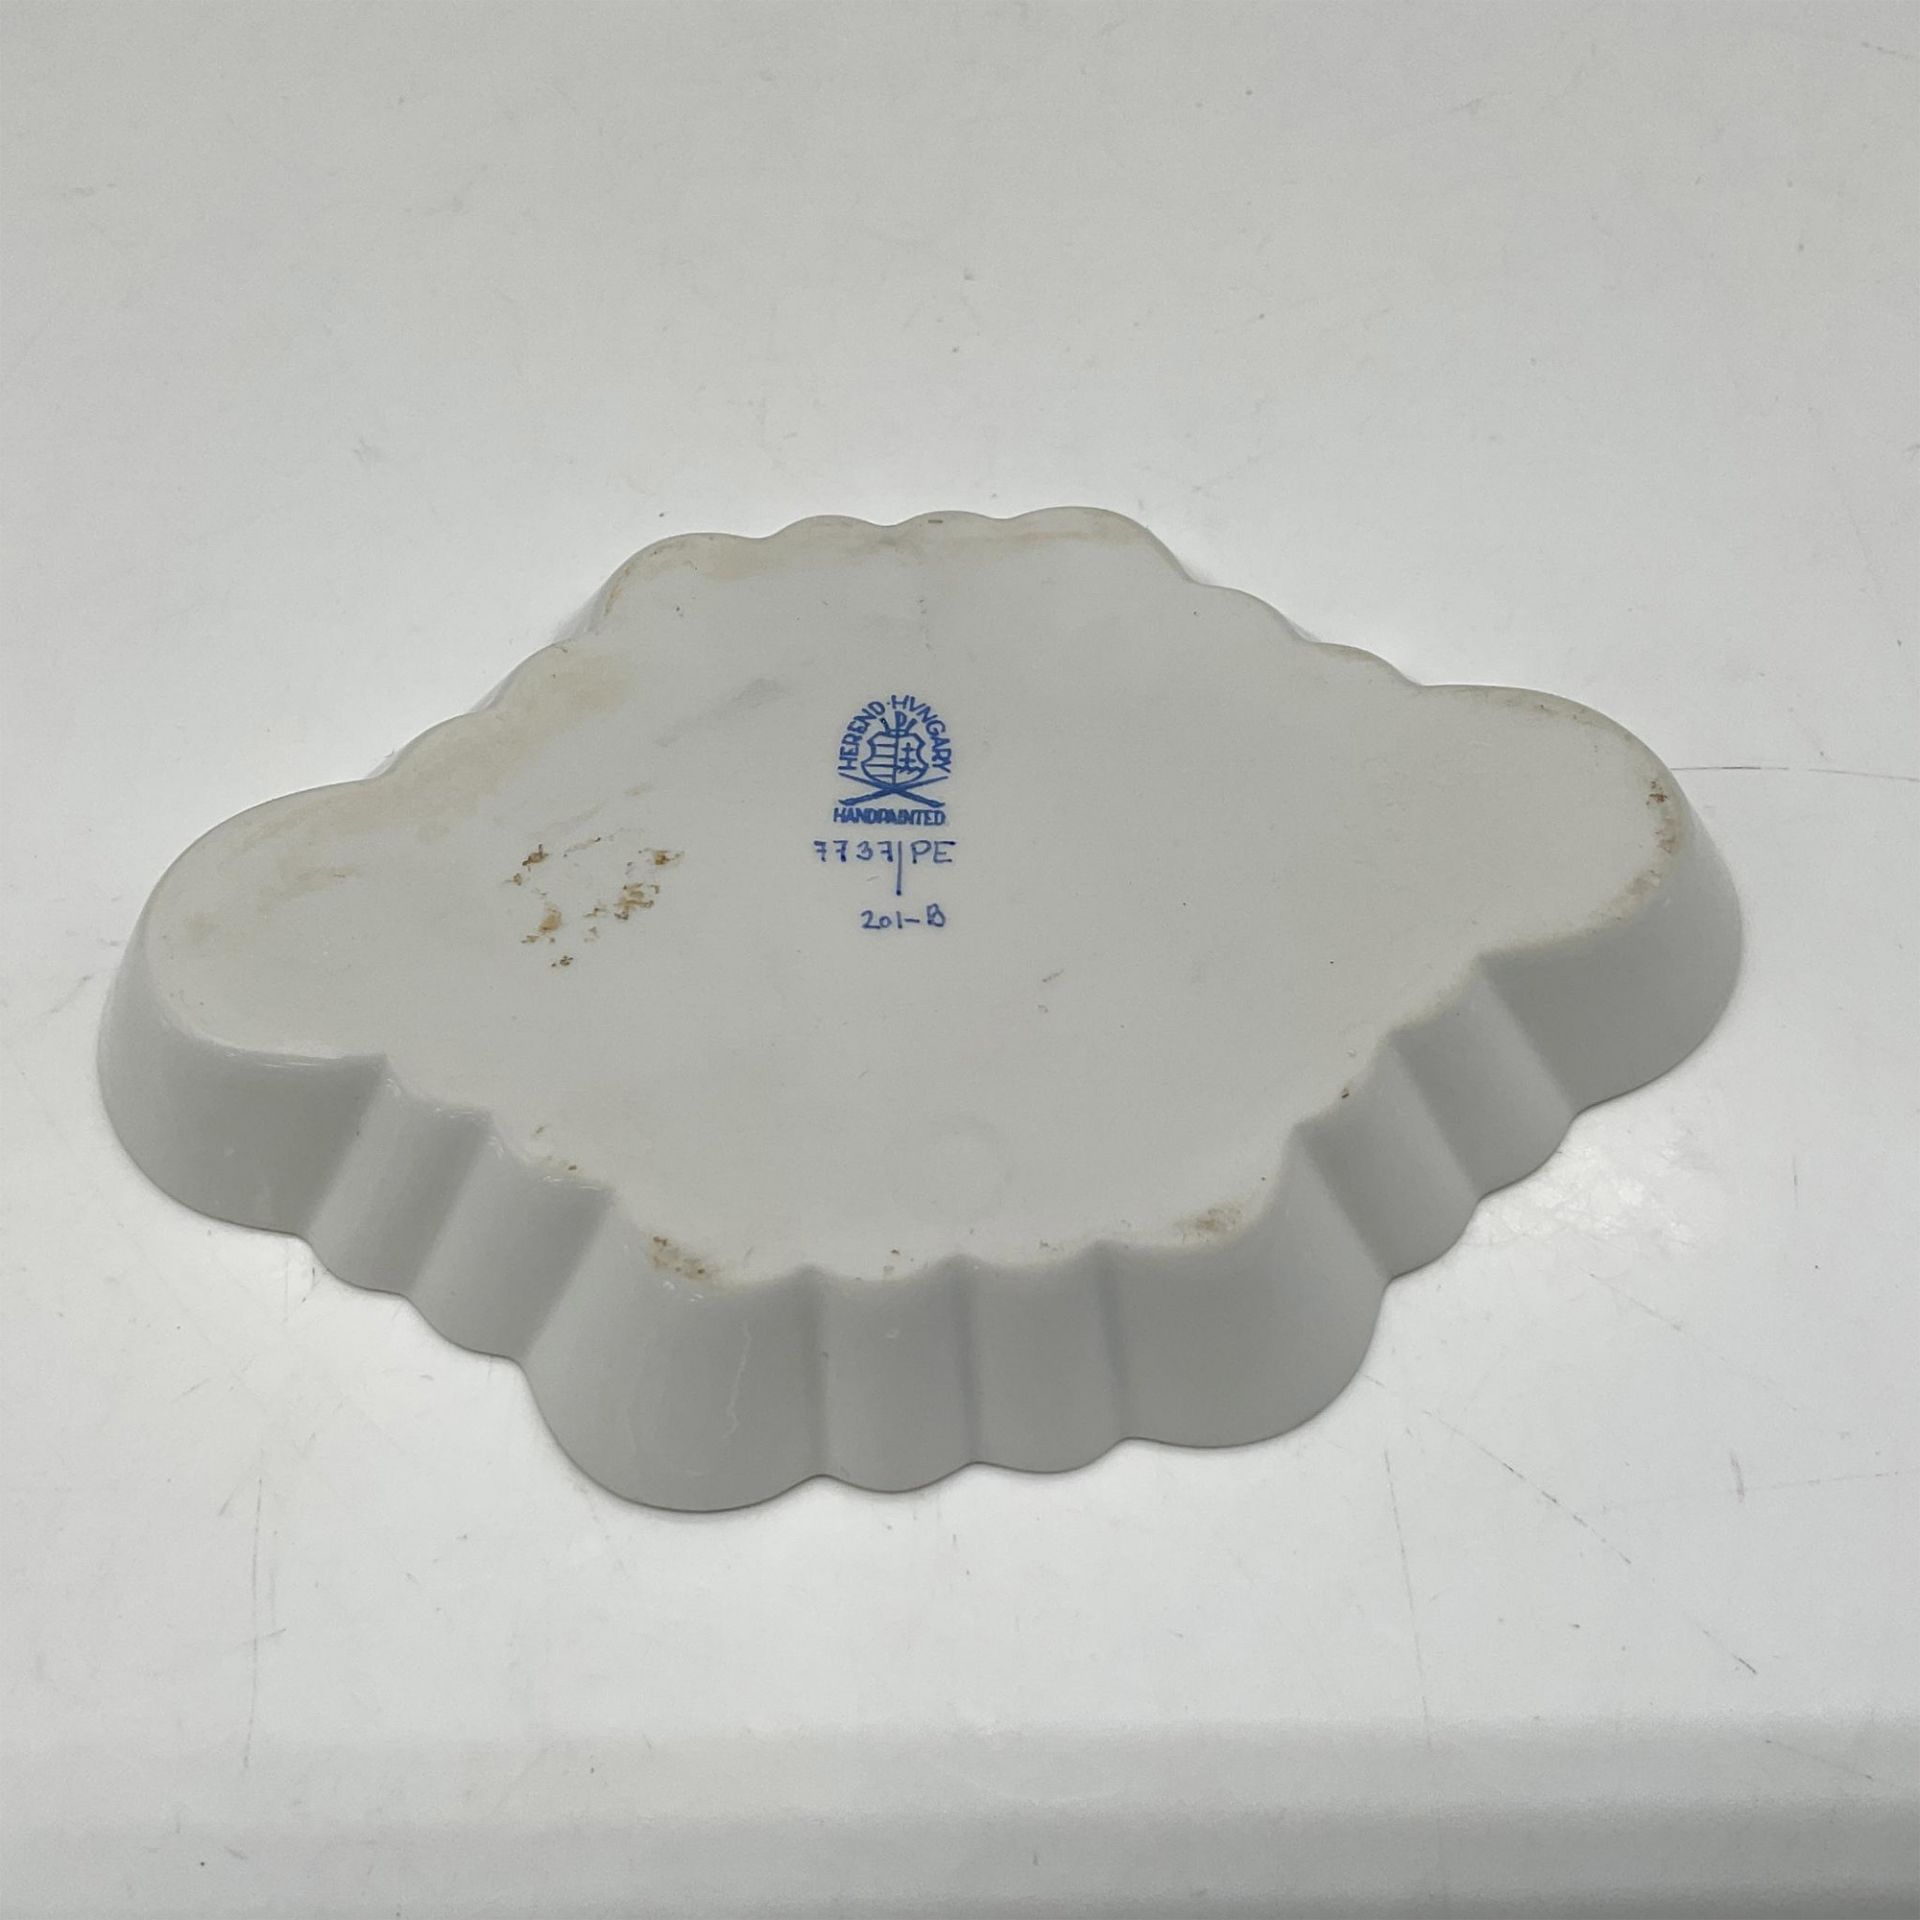 Herend Porcelain Coin Dish - Image 2 of 2